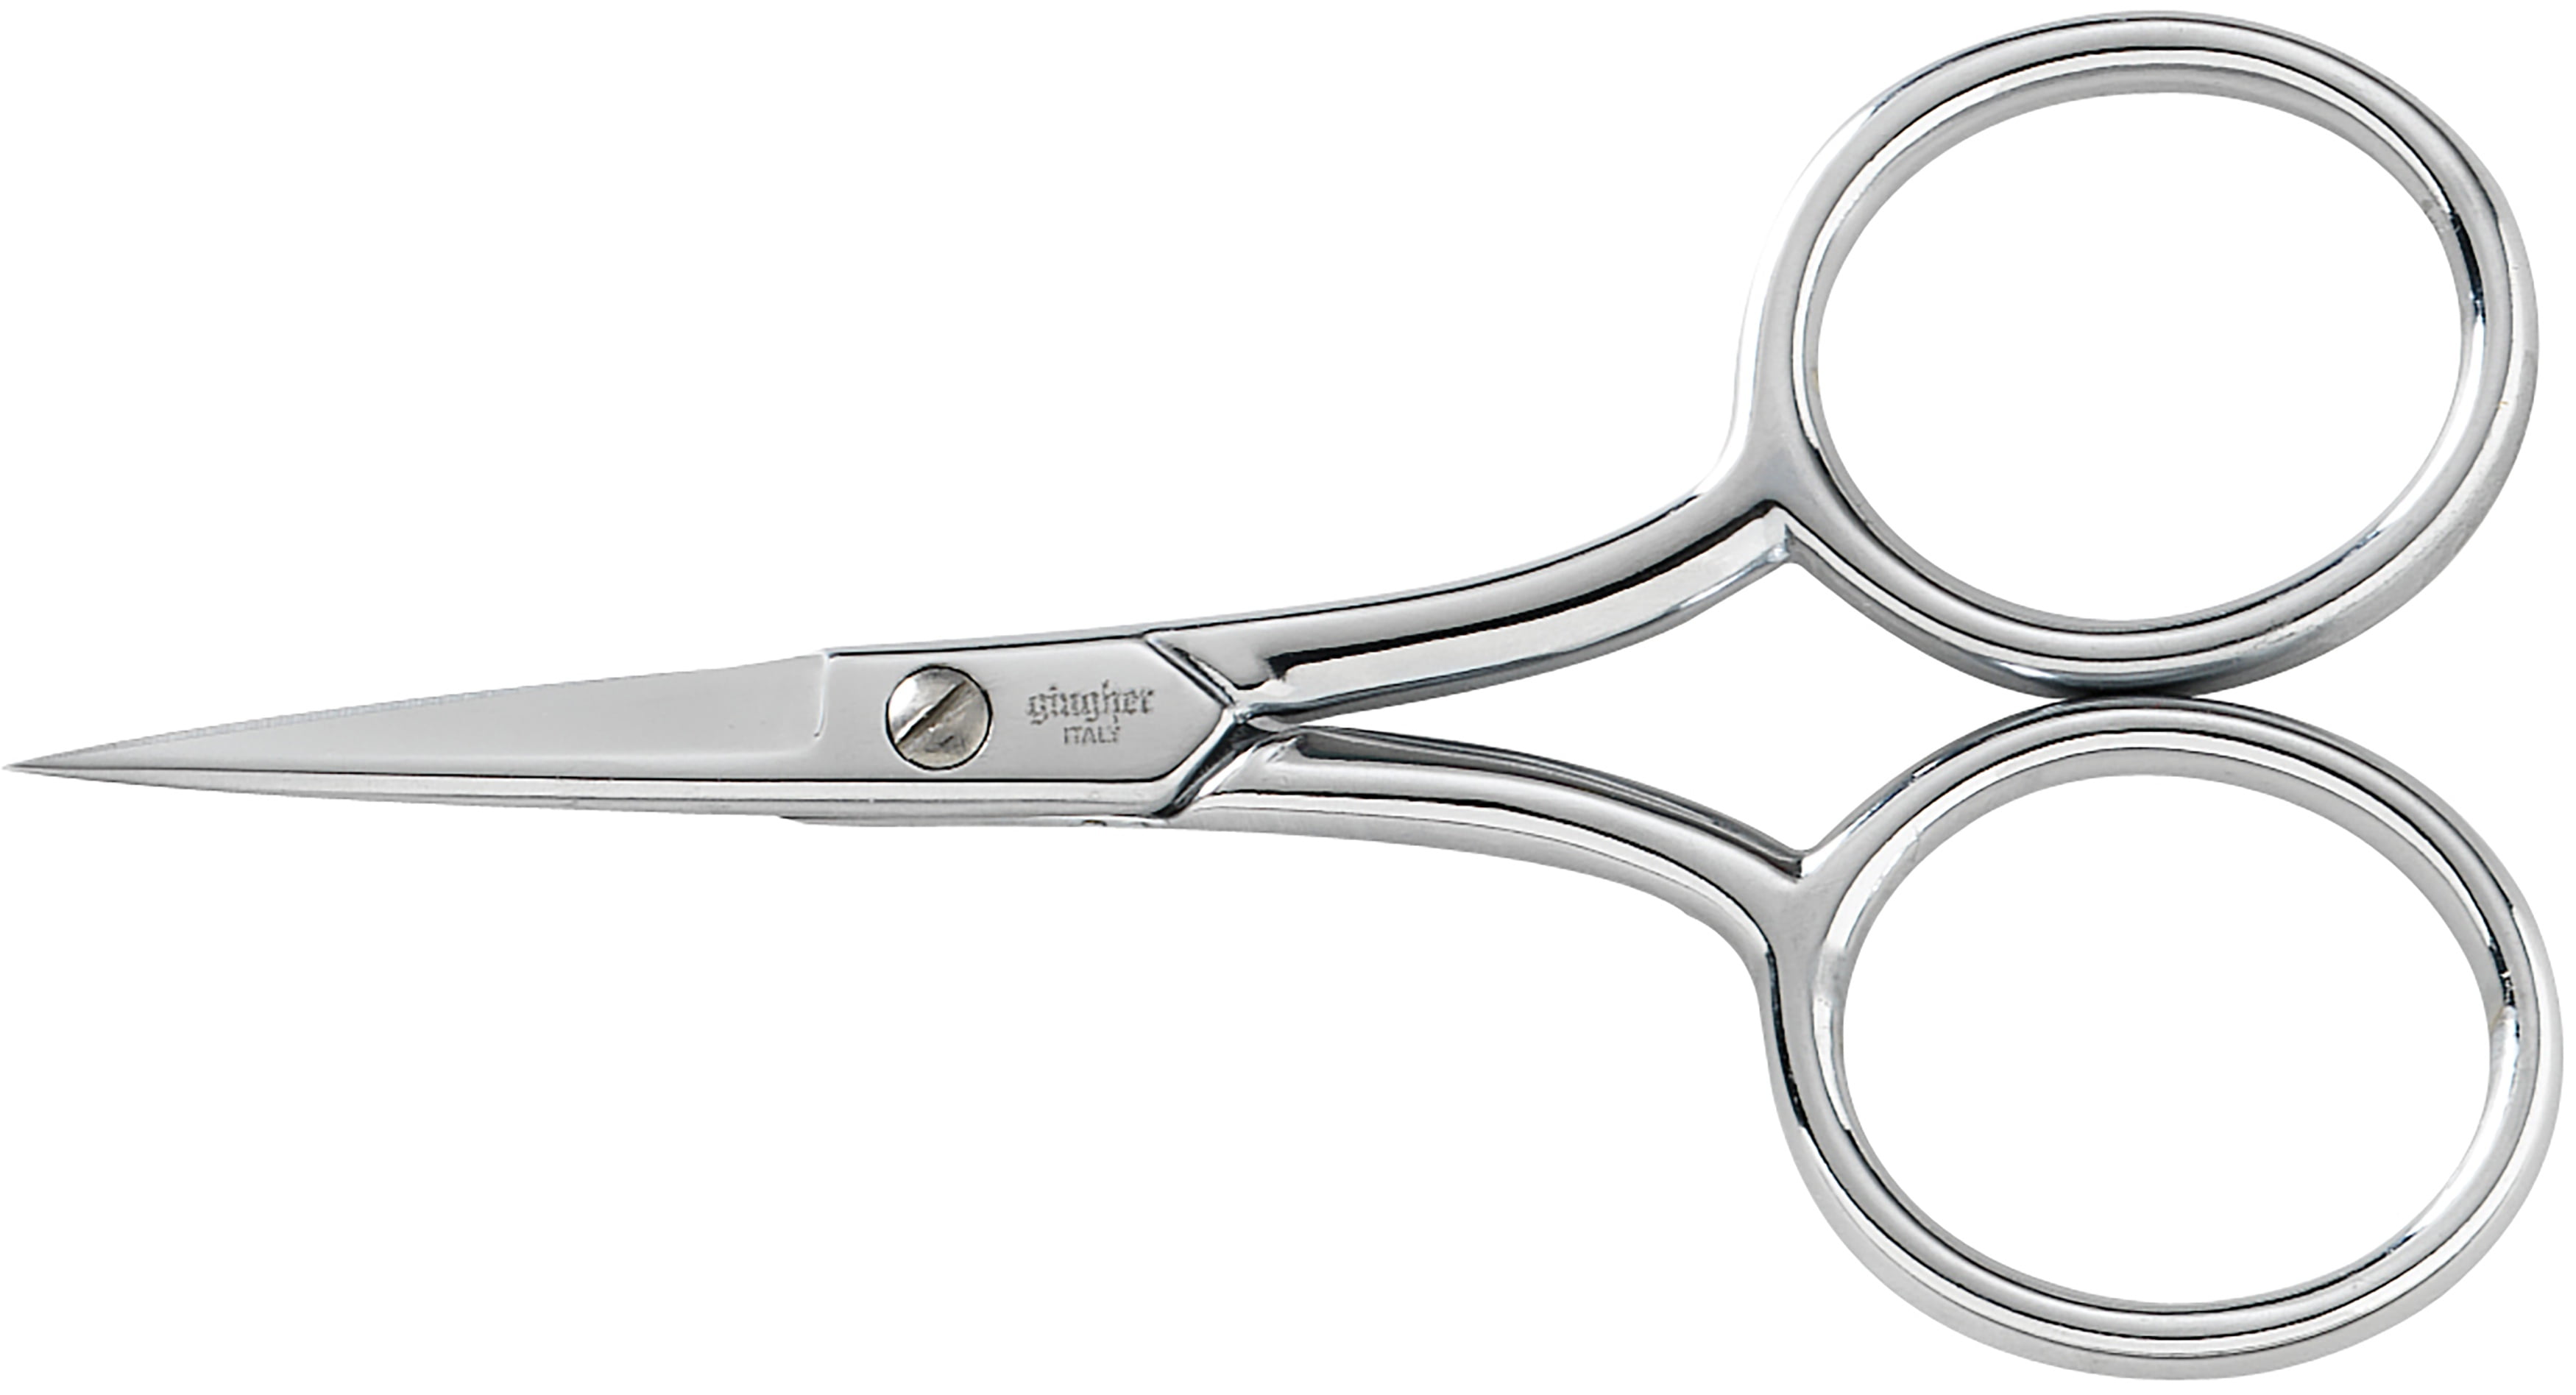 Gingher Scissors,10 Large,Right Hand 220540-1003, 1 - Ralphs